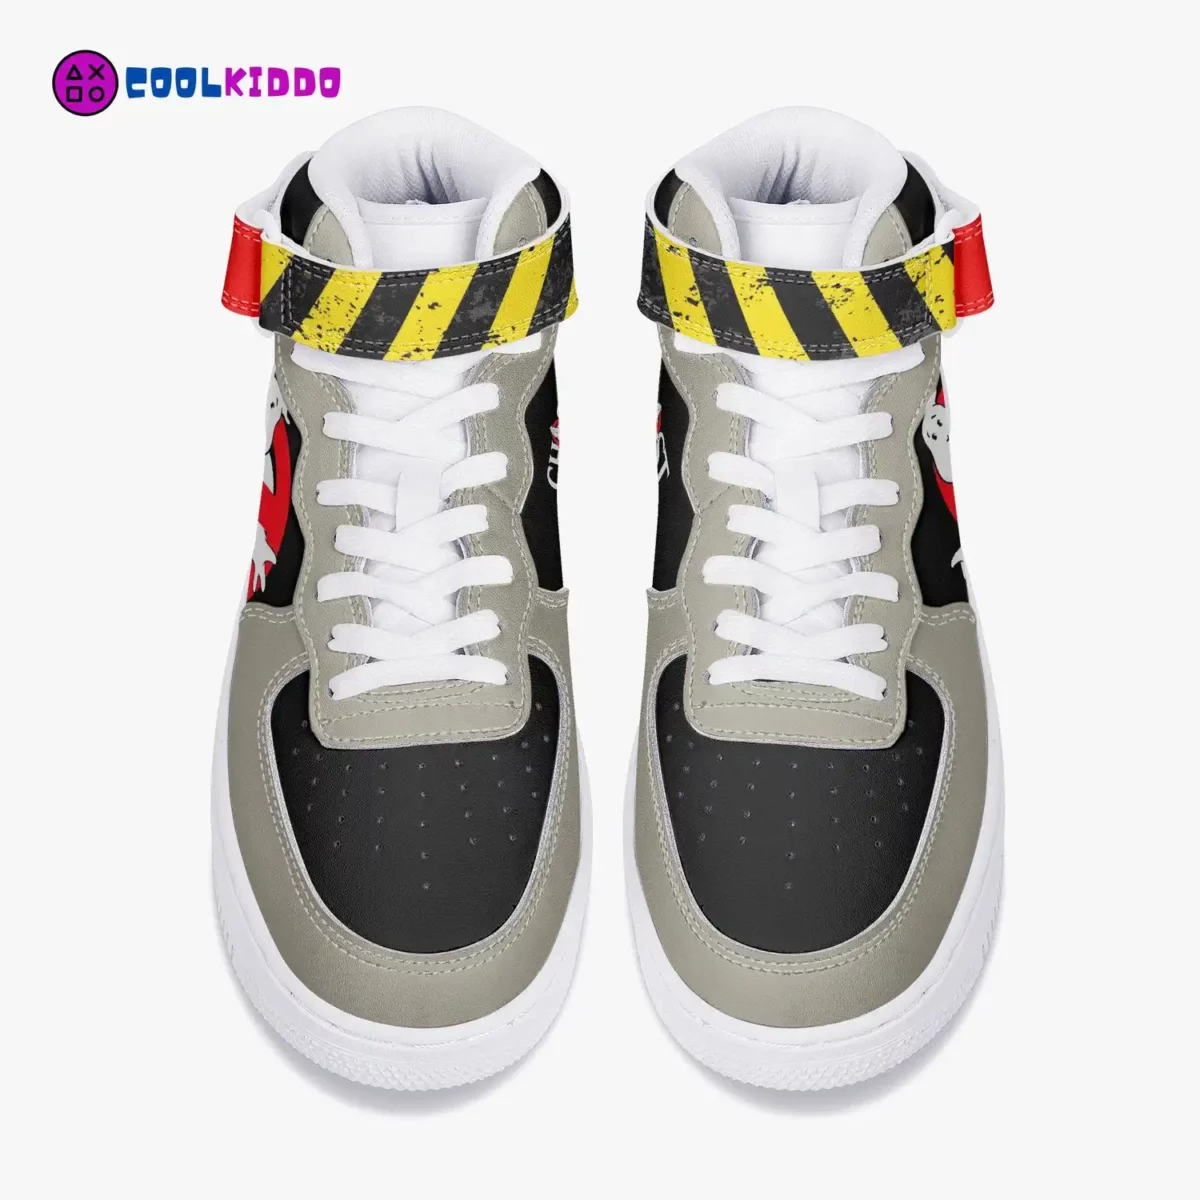 Custom GHOSTBUSTERS Air Force One Style High-Top Leather Sneakers – Casual Shoes for Youth/Adults Cool Kiddo 18